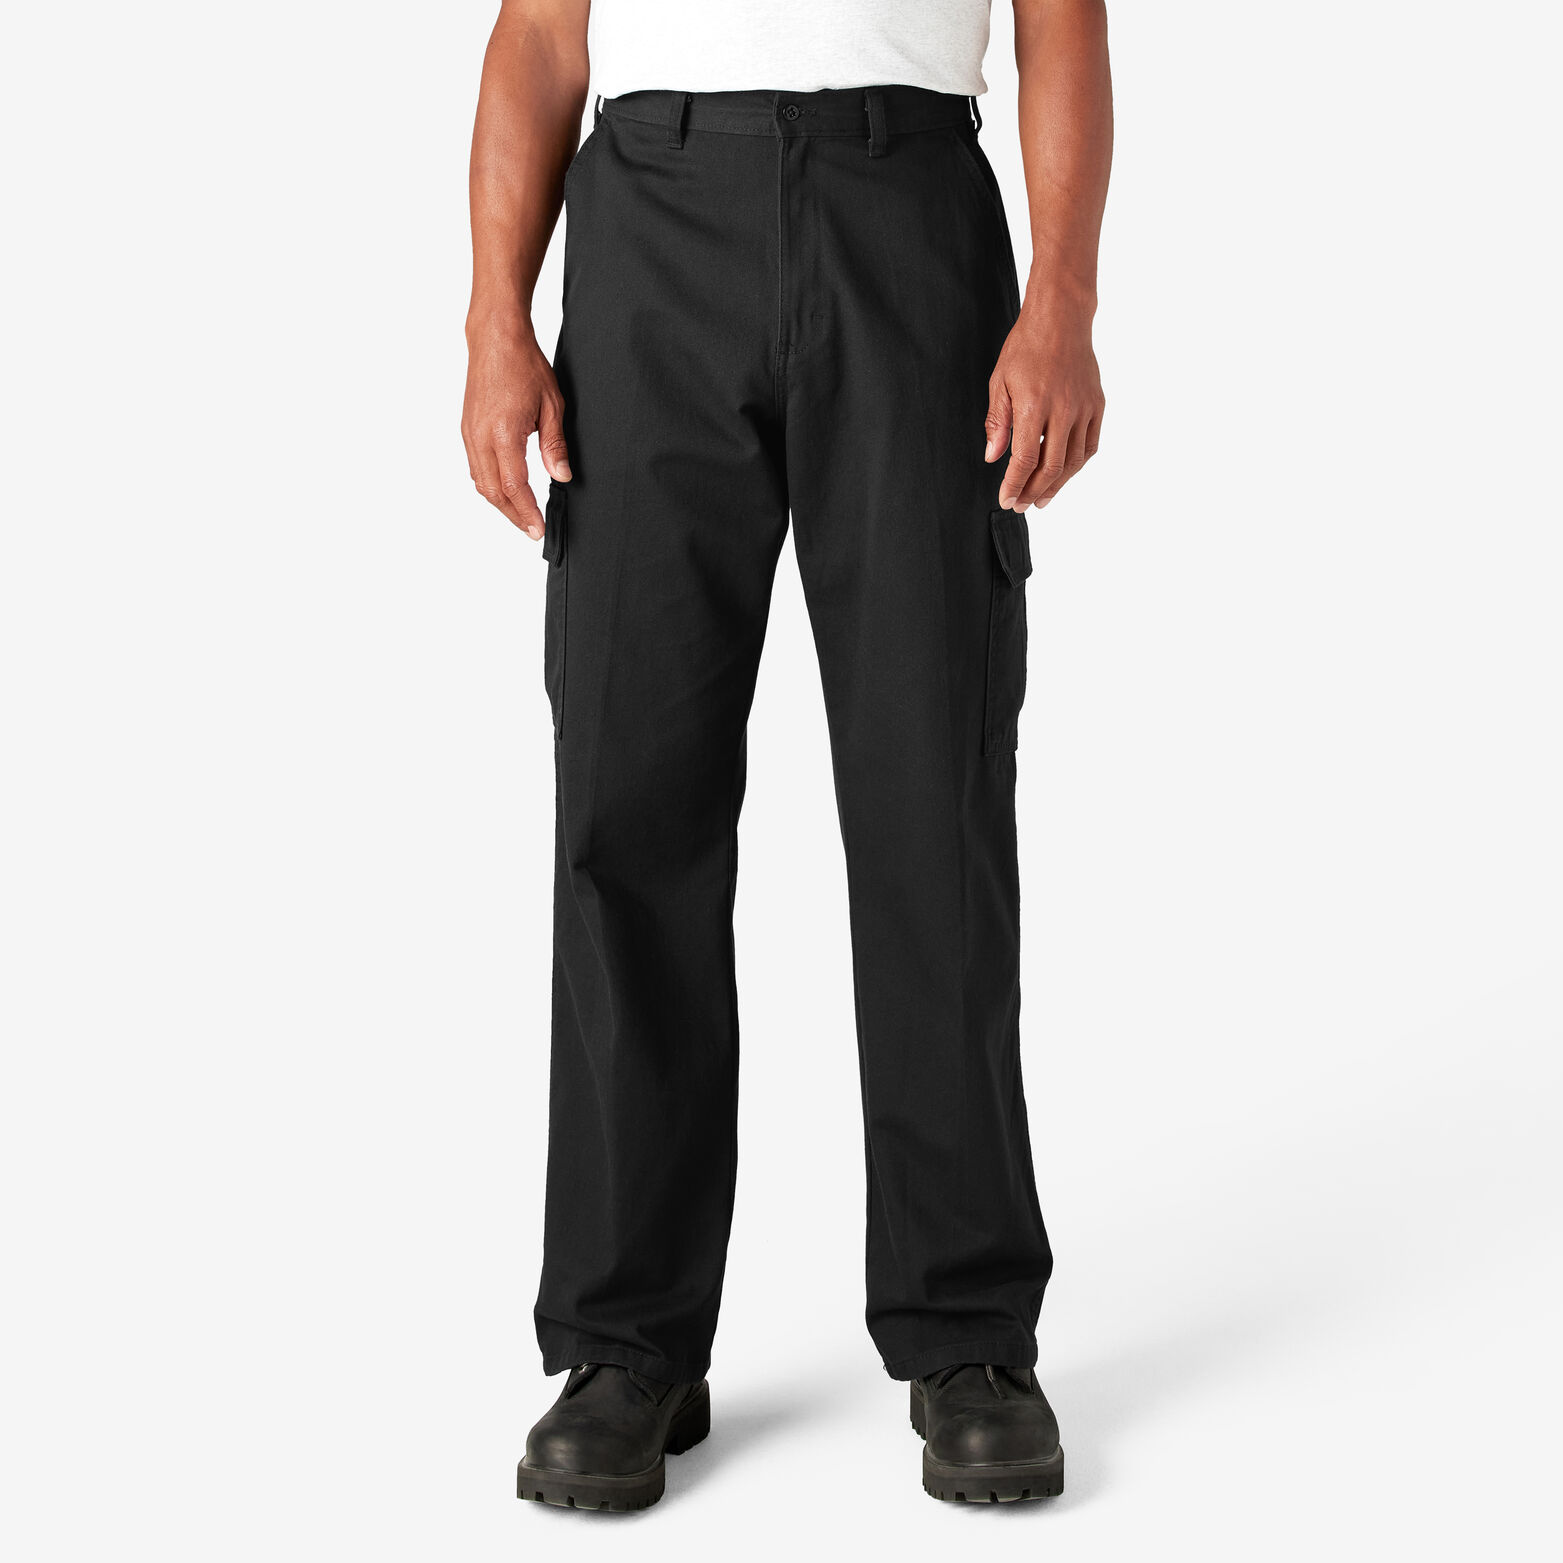 Tremble As shave Loose Fit Cargo Pants For Men | Dickies